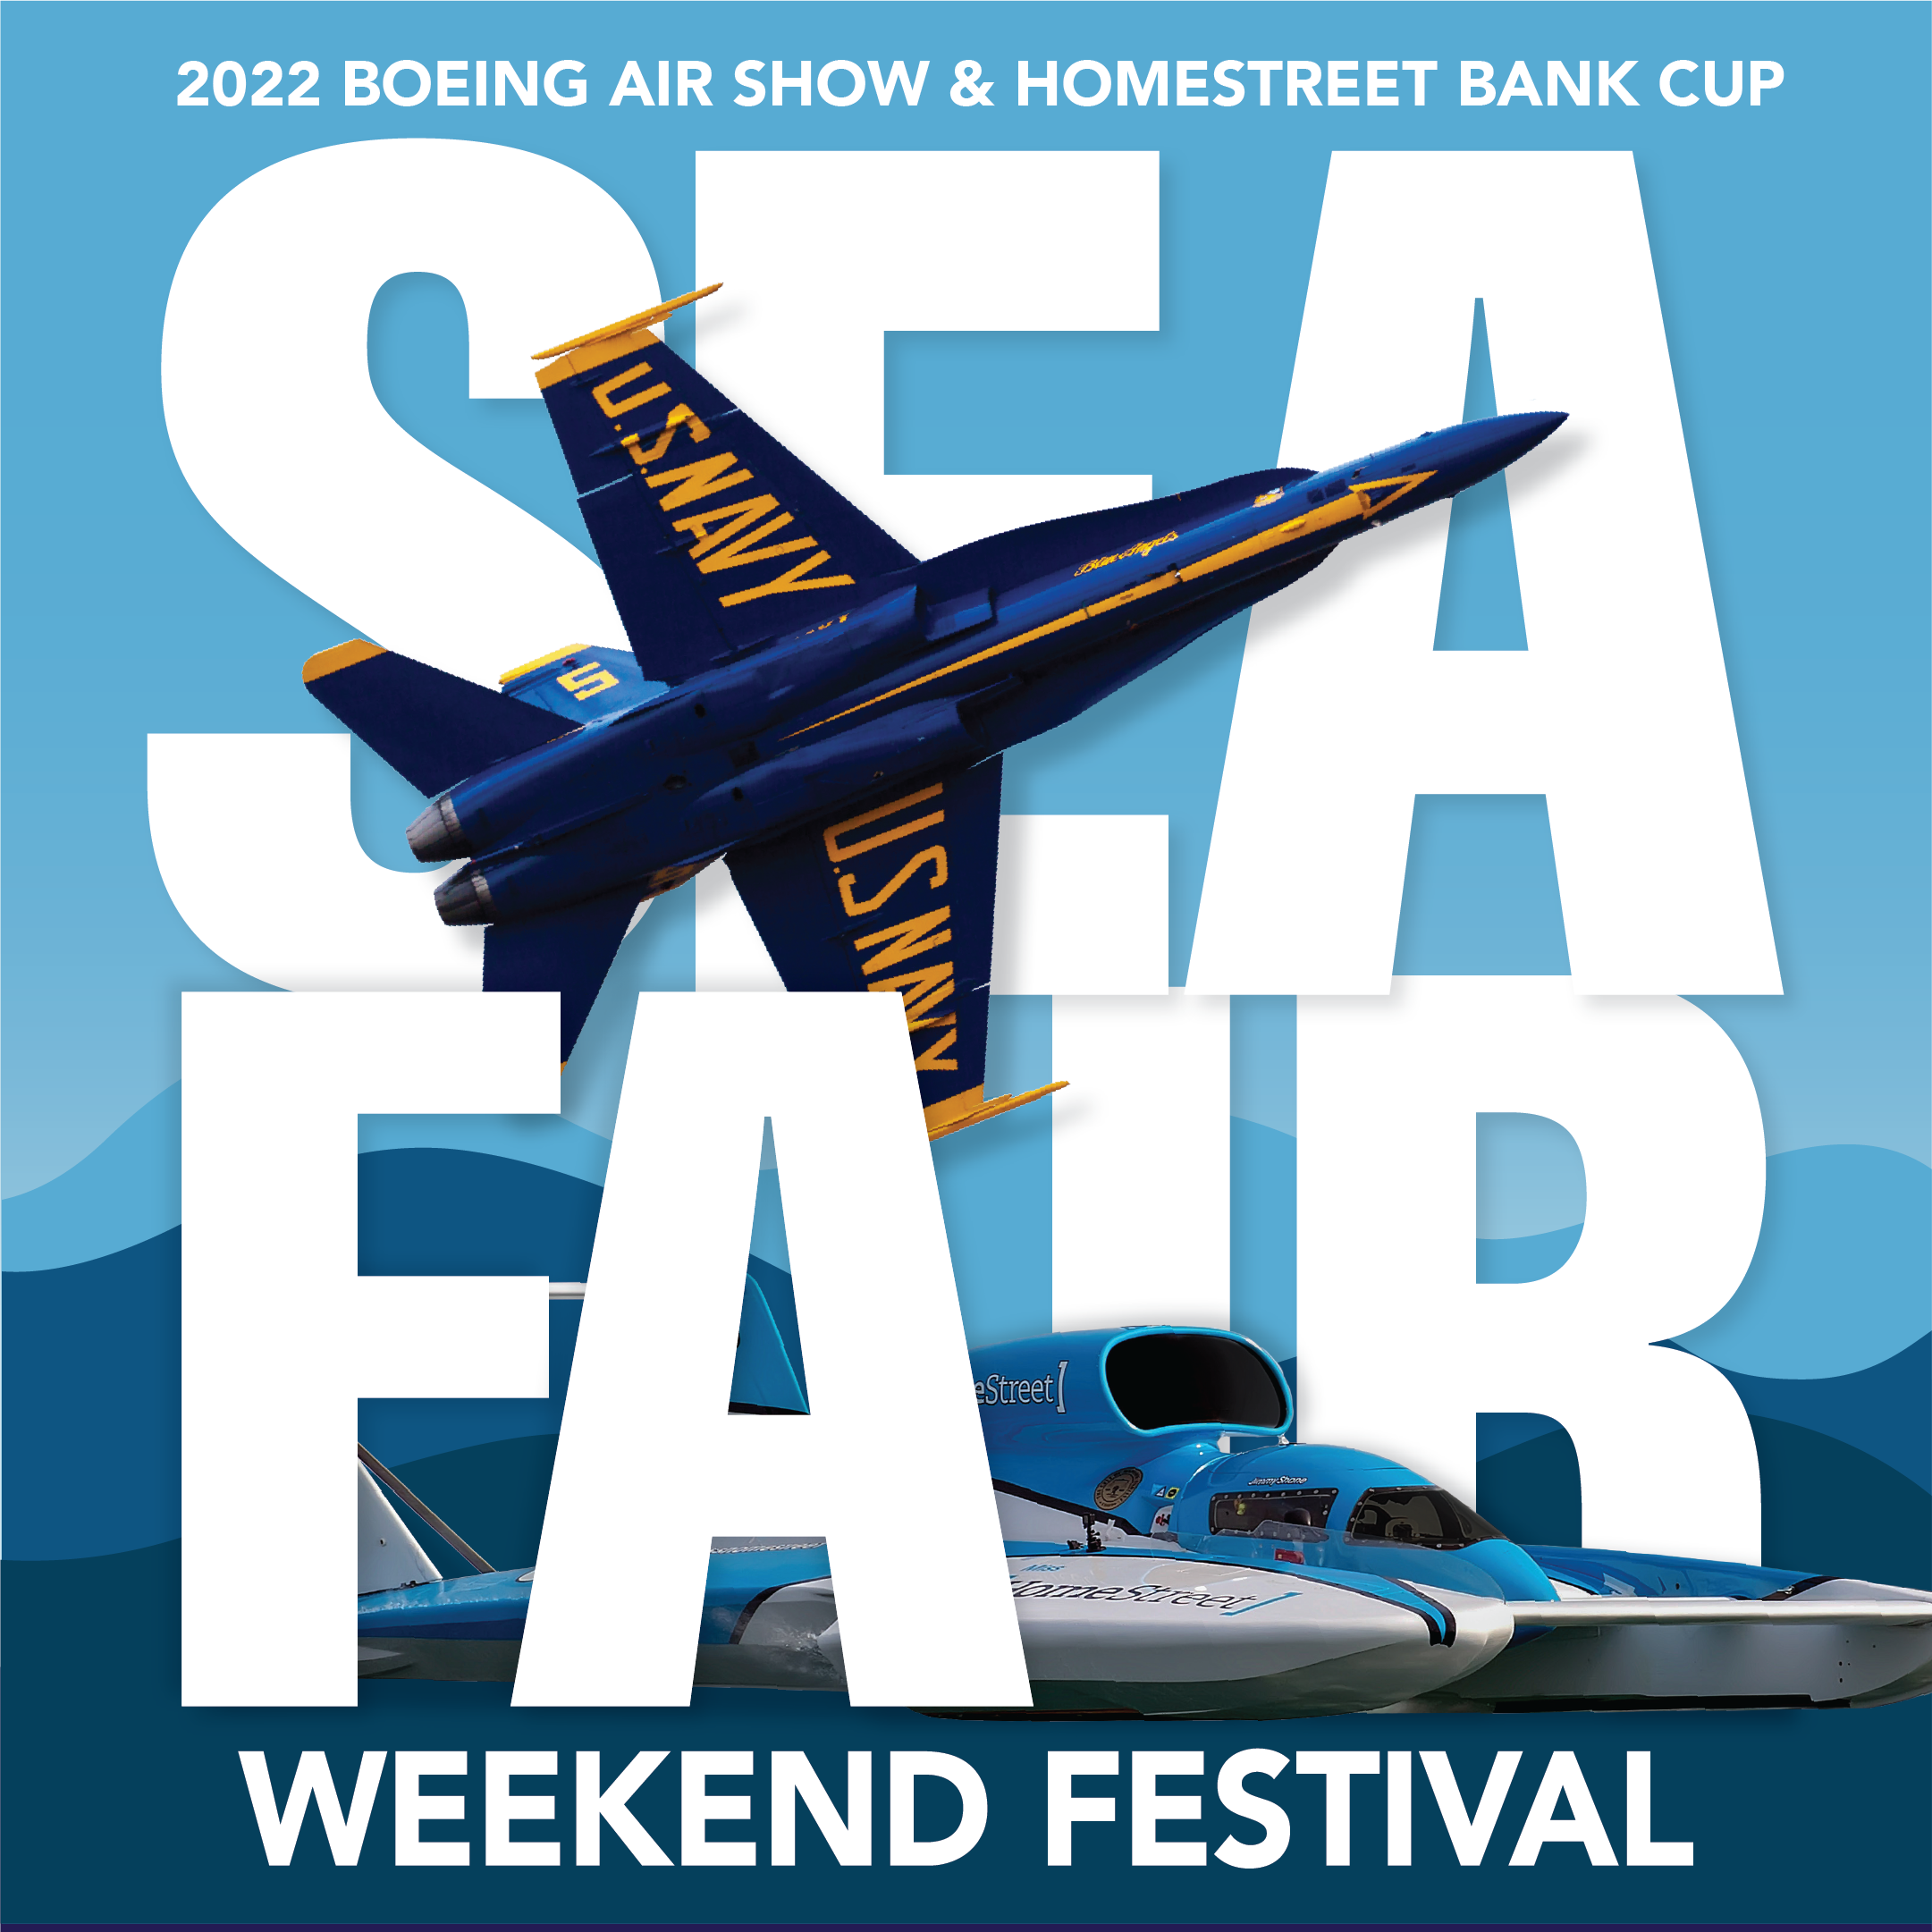 The Seafair Weekend Festival features hydroplane races, a Blue Angels airshow and much more! We used graphics of the hydroplane and the Super Hornet to showcase this Seattle Summer highlight.